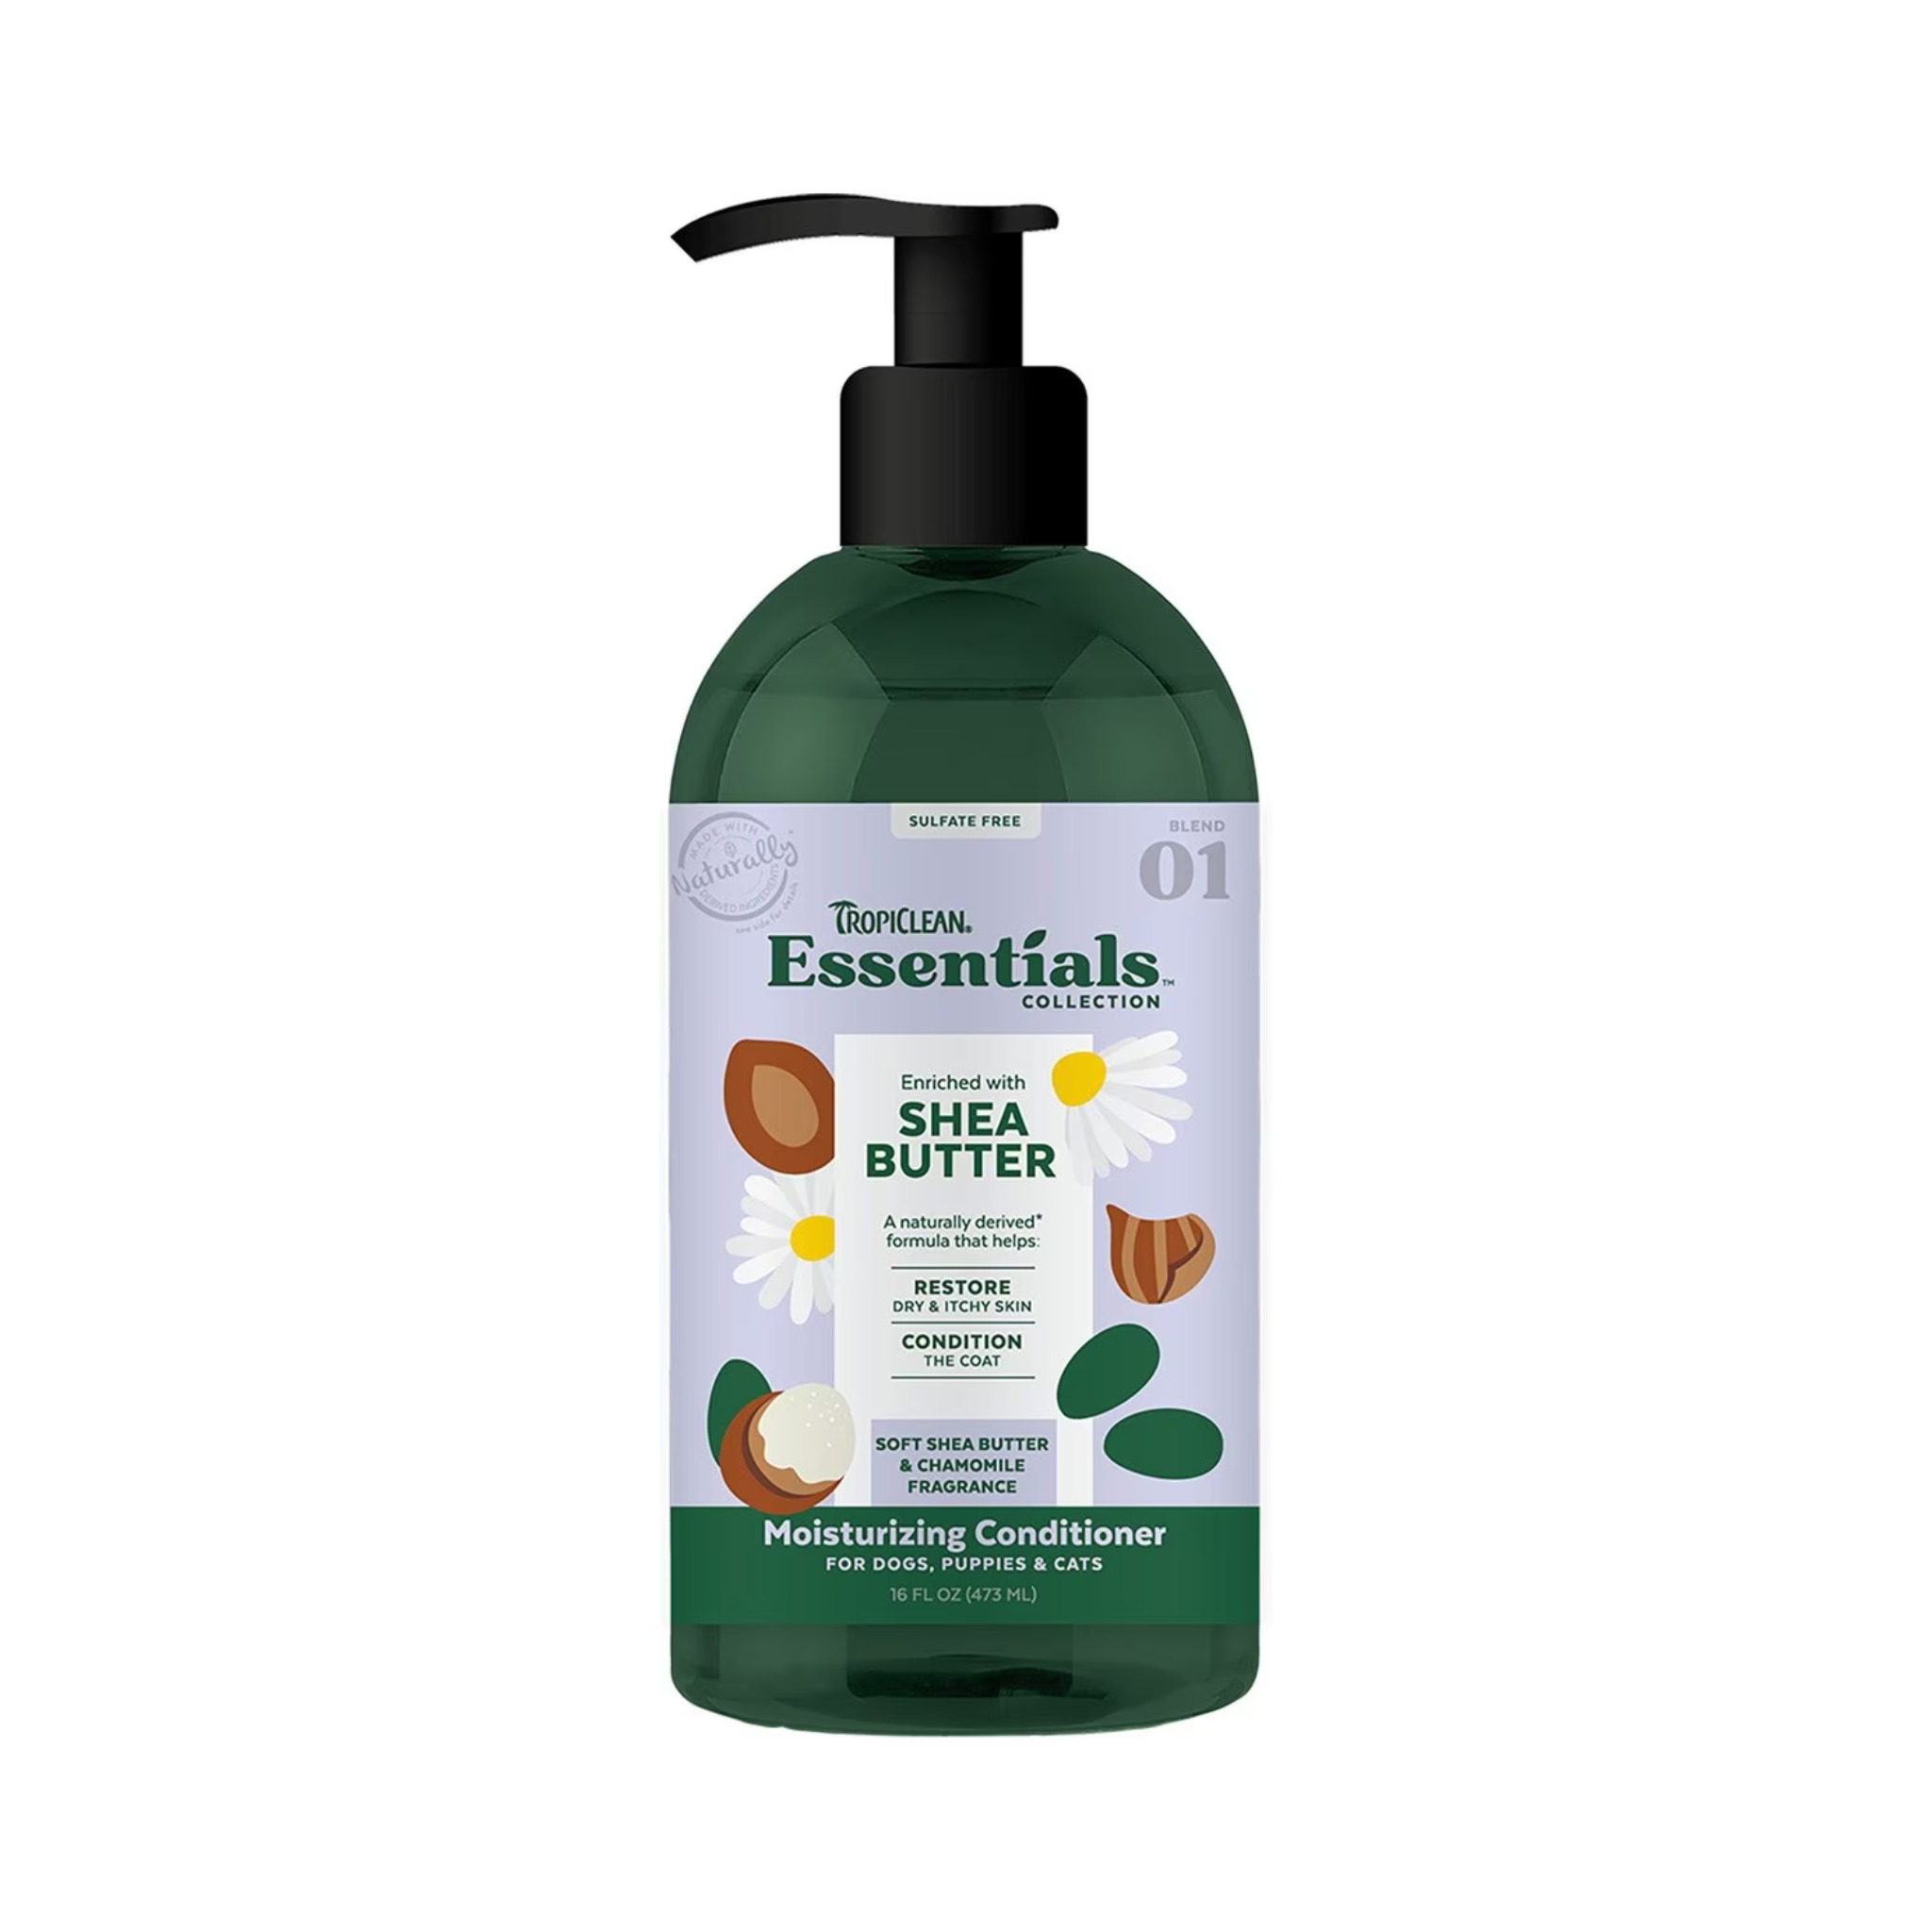 TropiClean Essentials Shea Butter Conditioner for Dogs